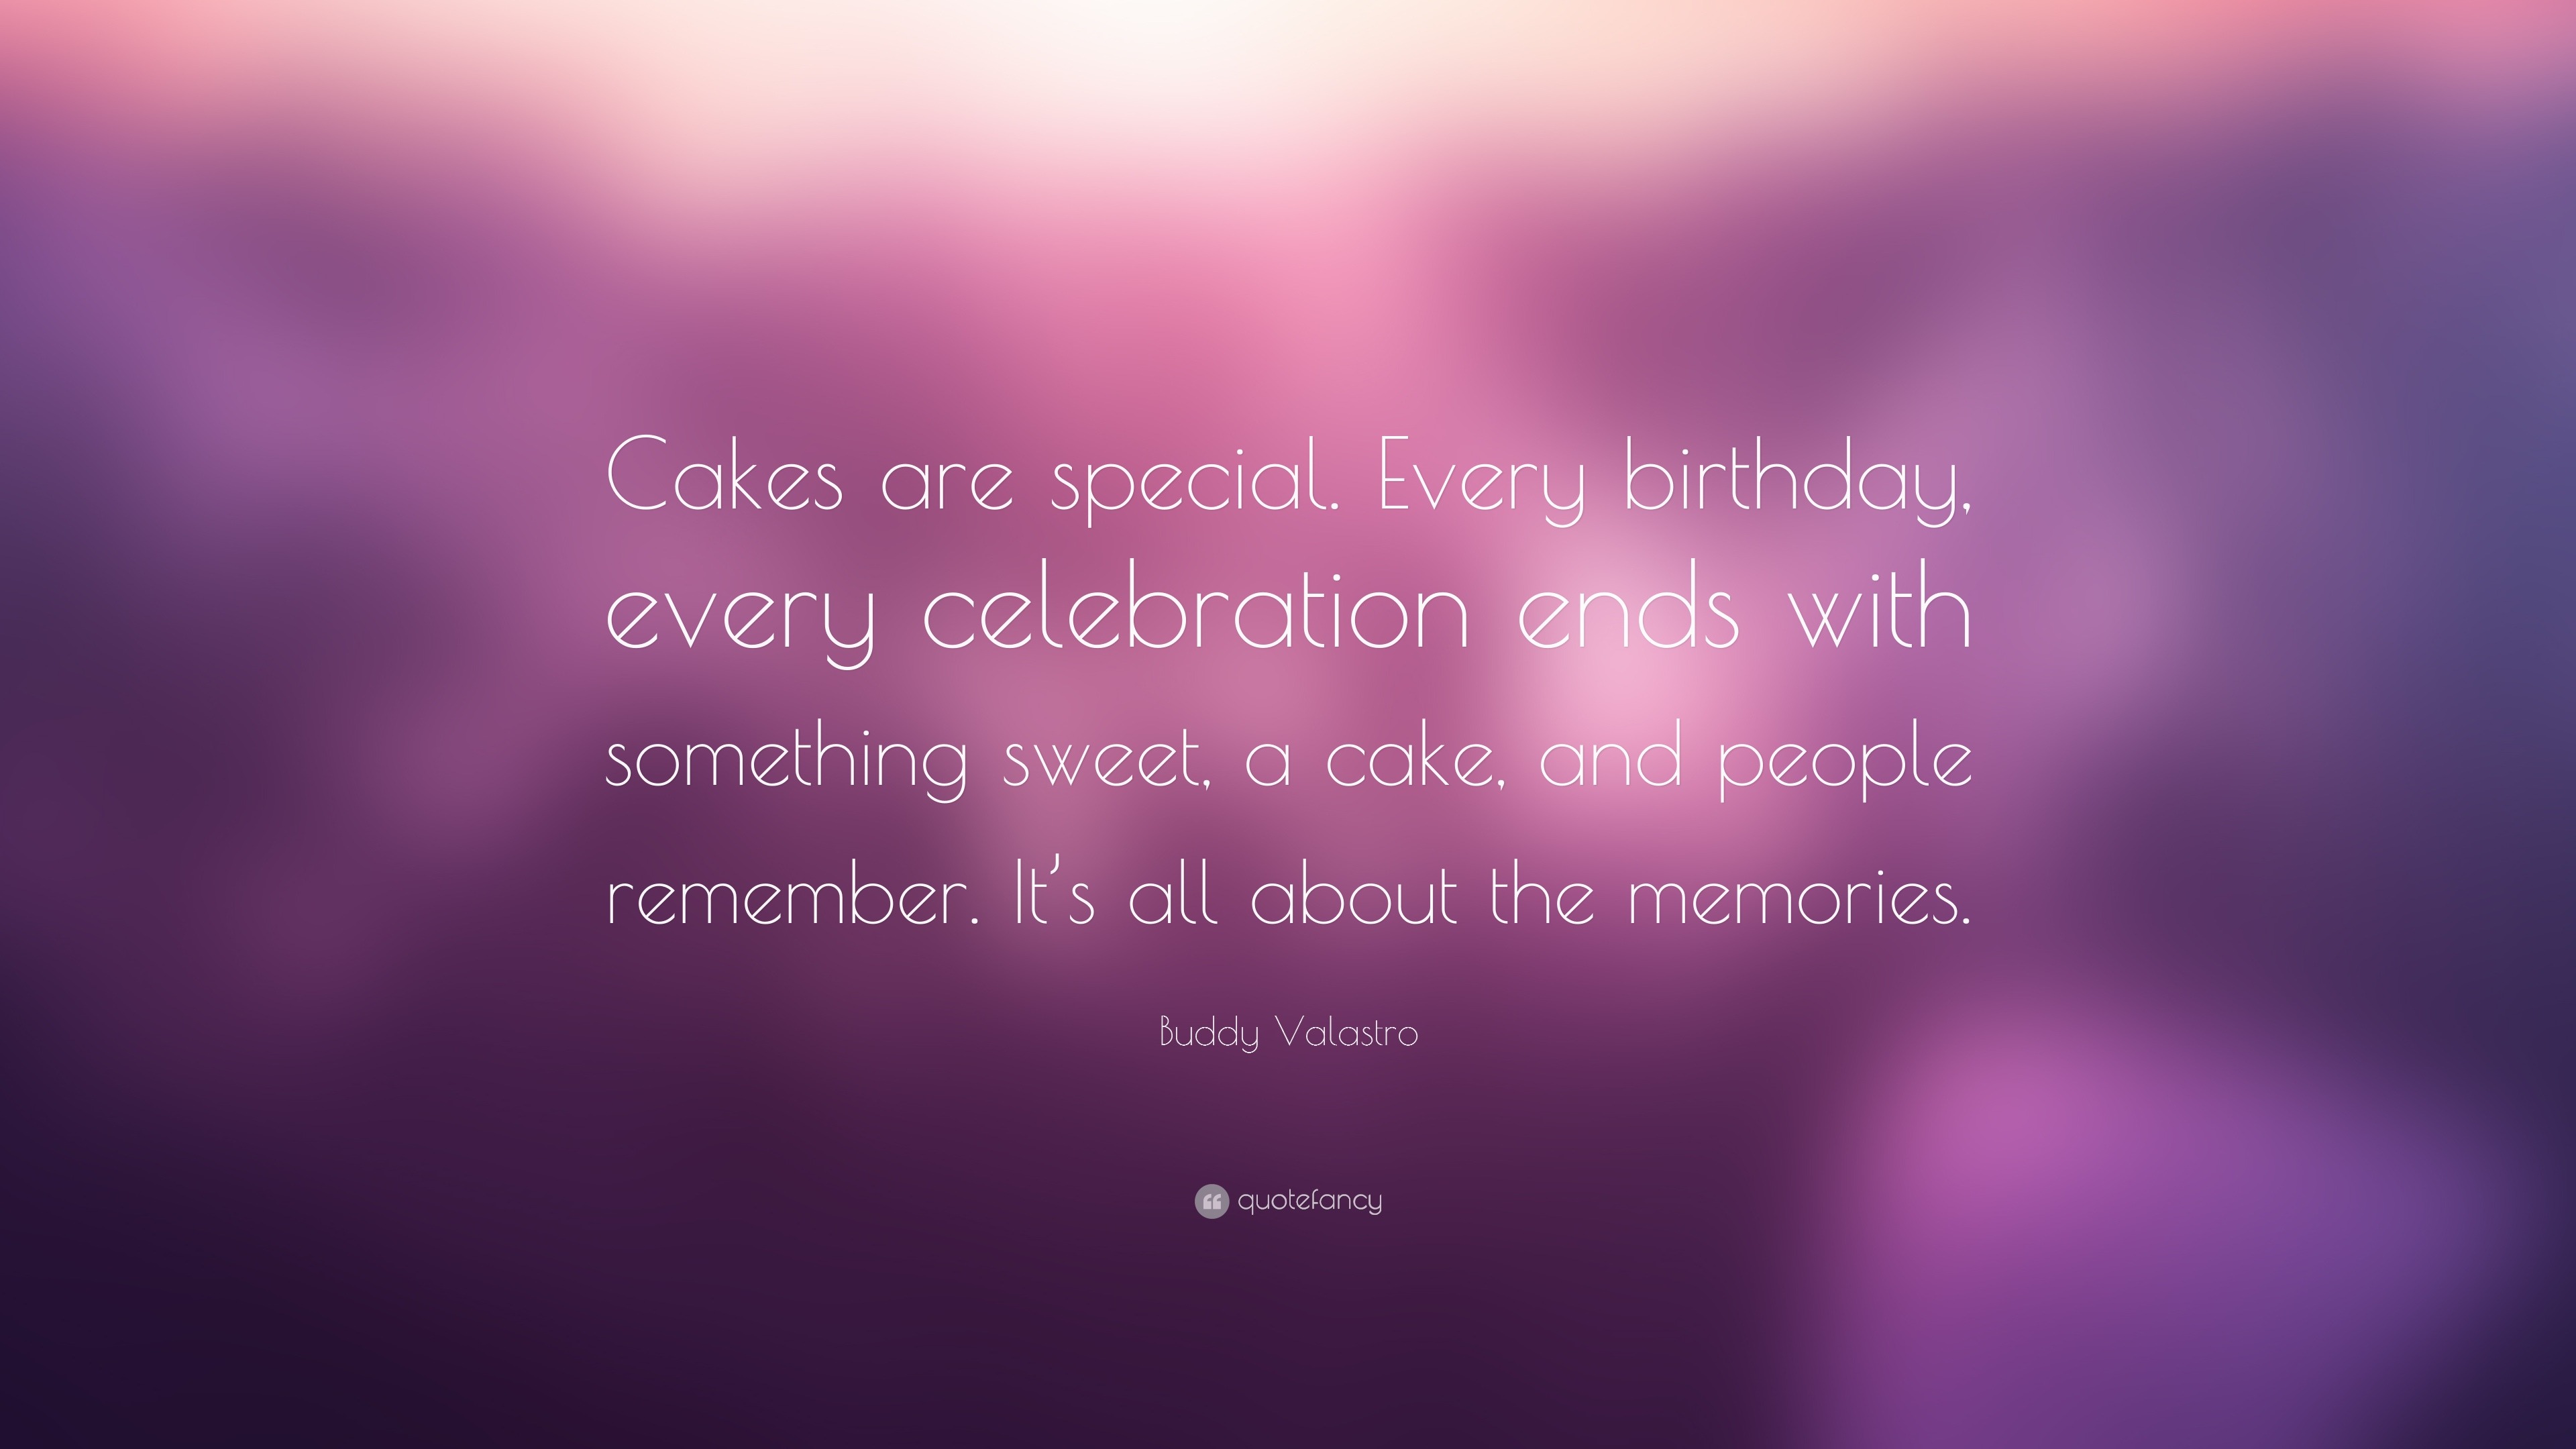 301+ Cake Business Marketing Slogans and Quotes That Increase Sales